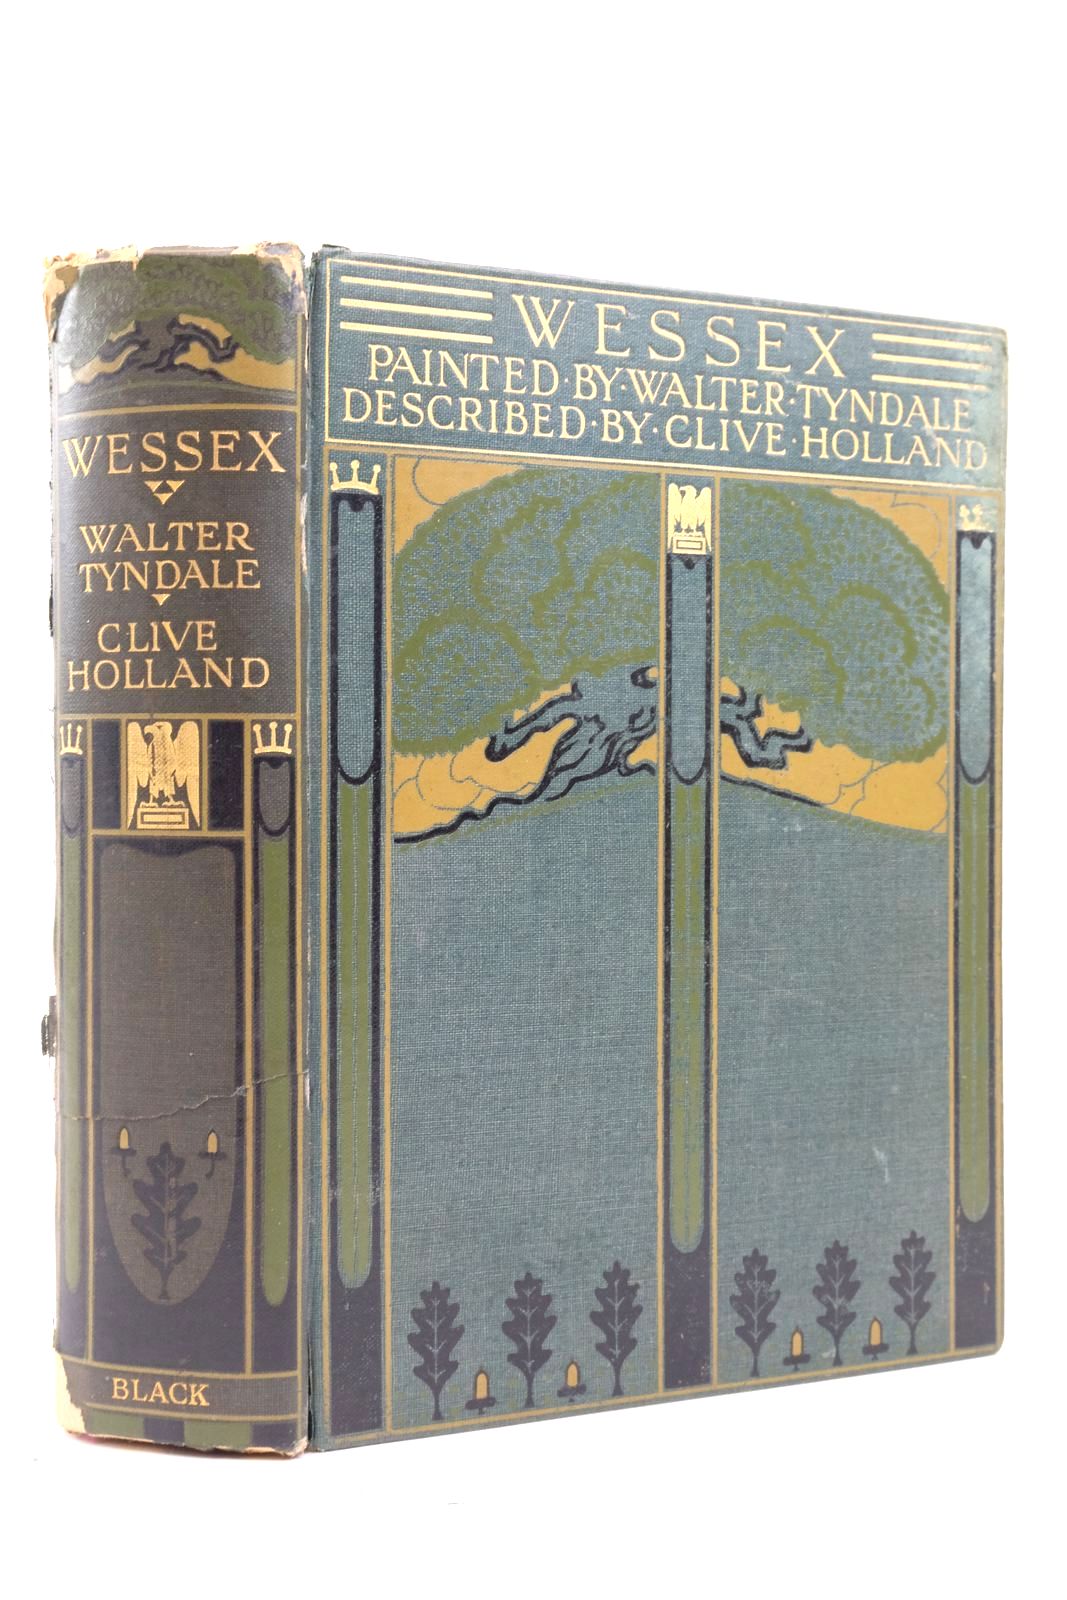 Photo of WESSEX written by Holland, Clive illustrated by Tyndale, Walter published by Adam &amp; Charles Black (STOCK CODE: 2137553)  for sale by Stella & Rose's Books